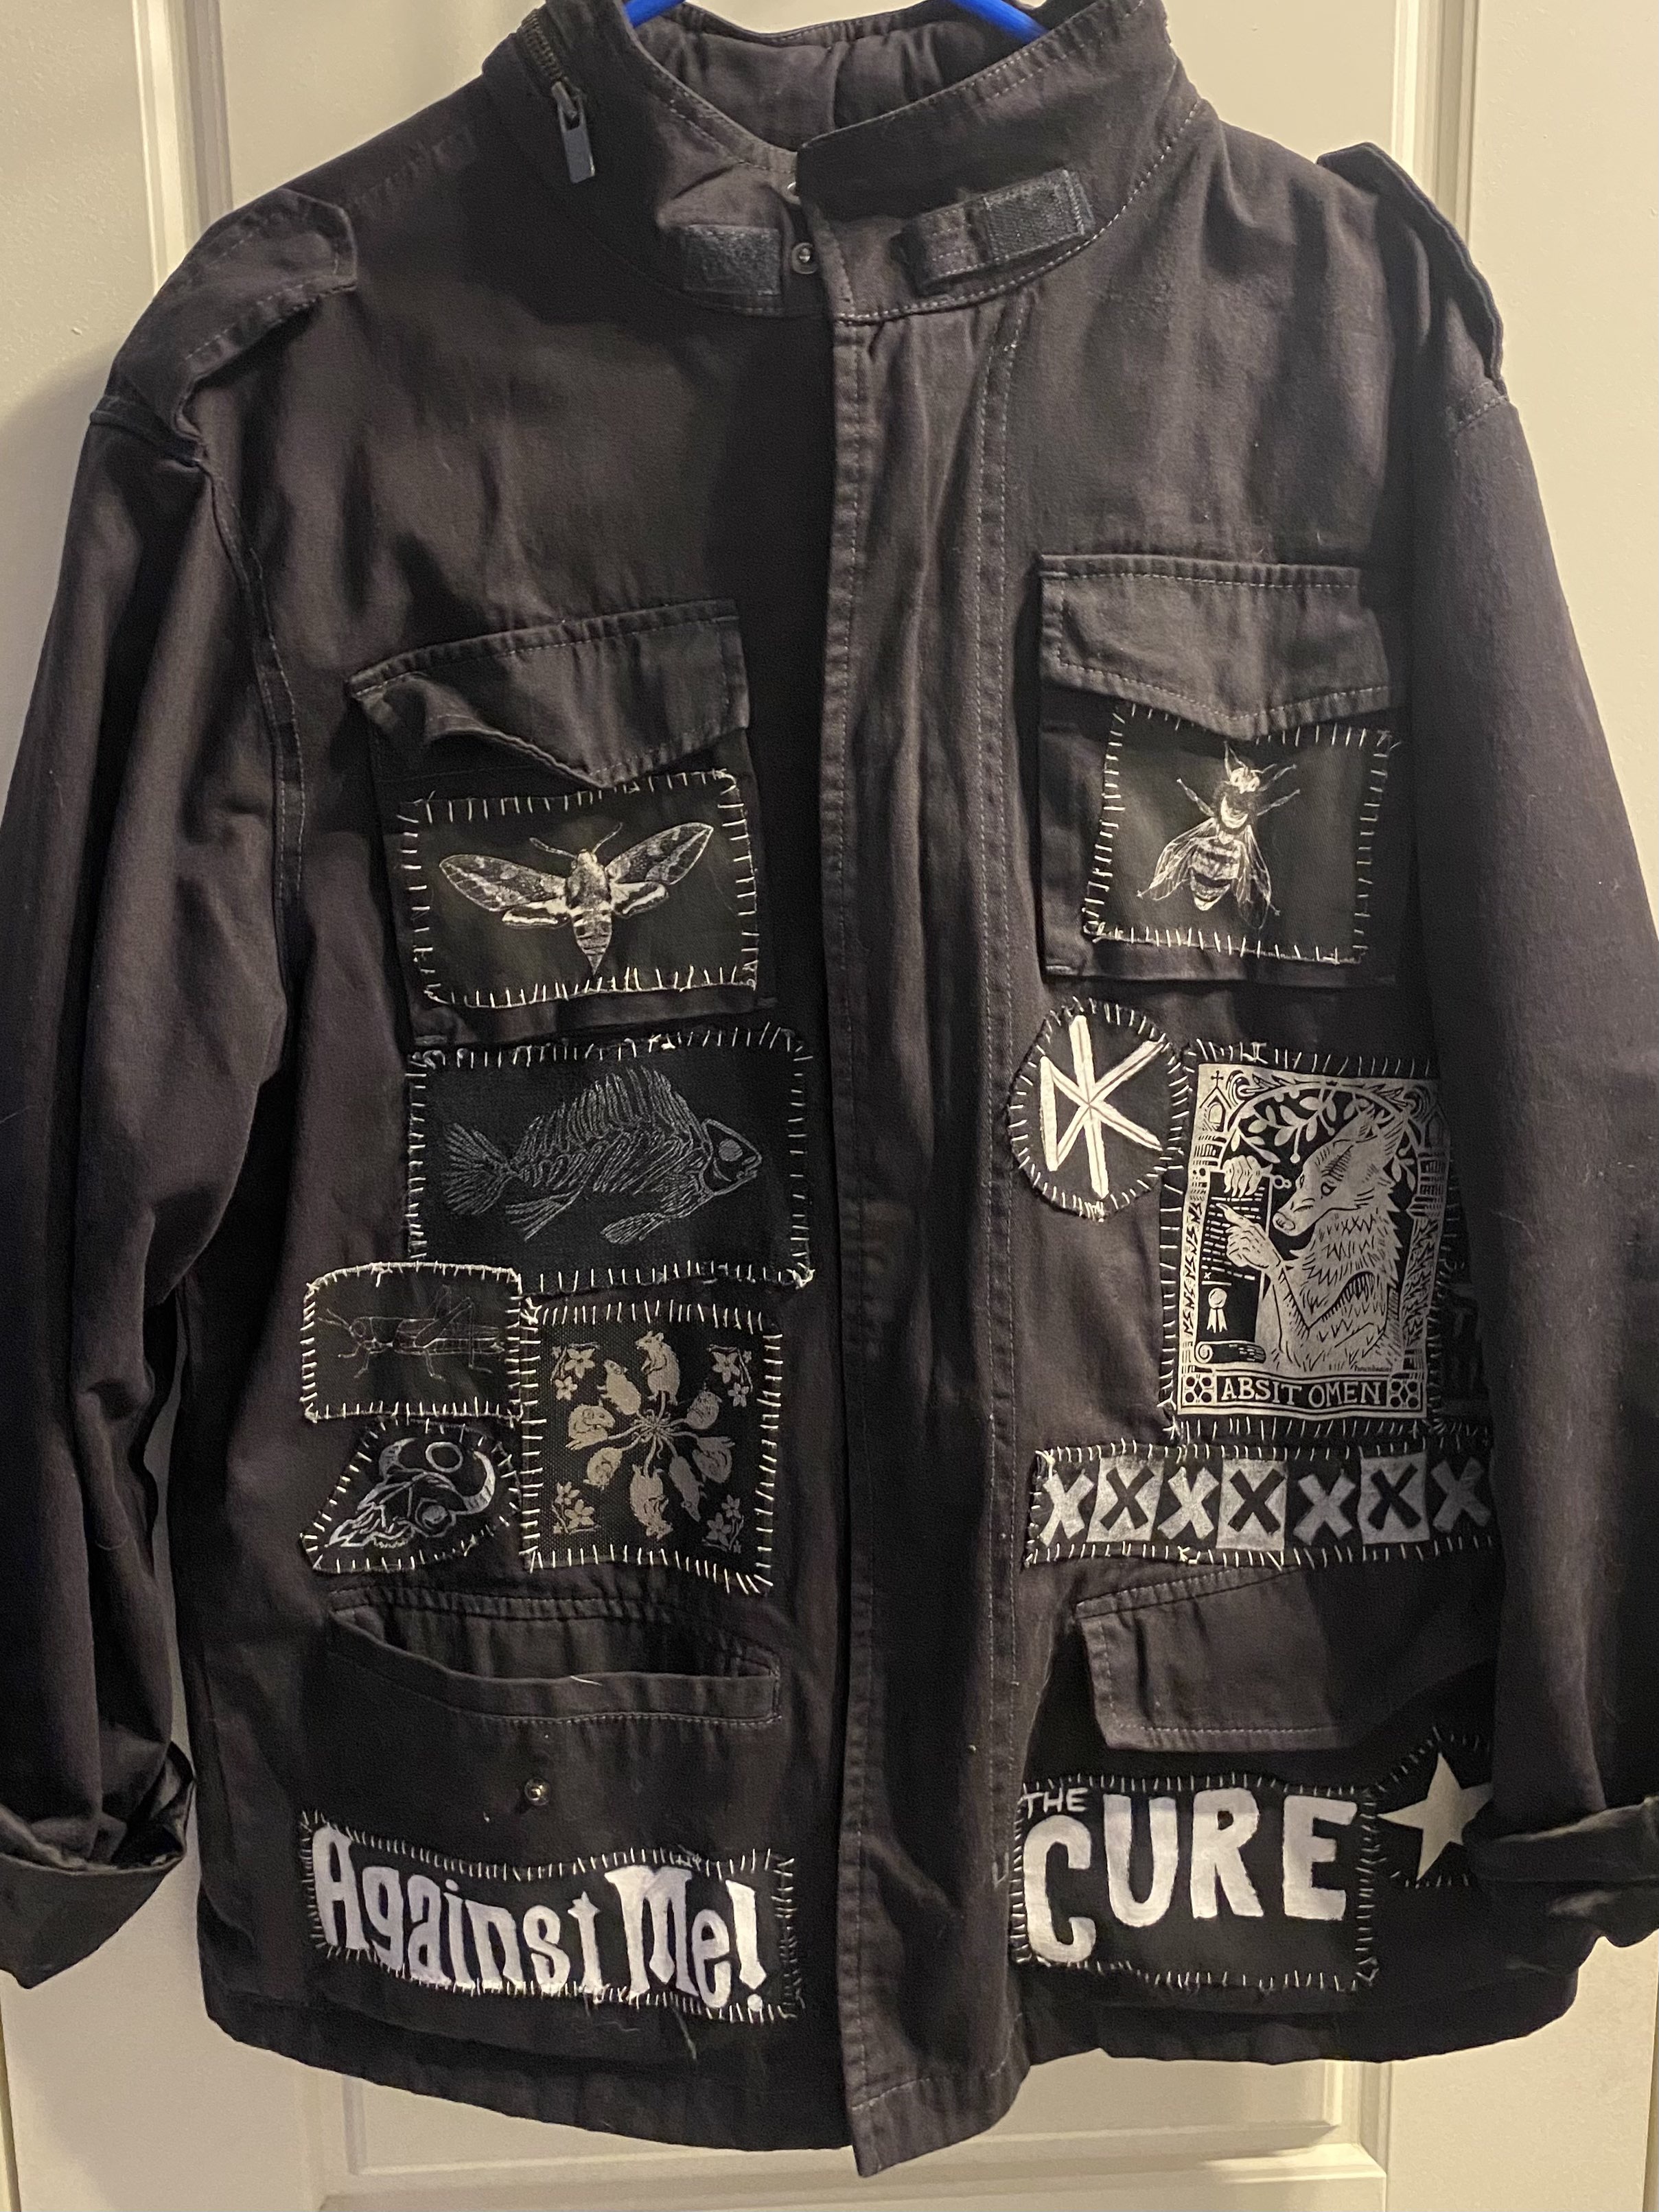 The front of a black jacket with several hand-sewn patches